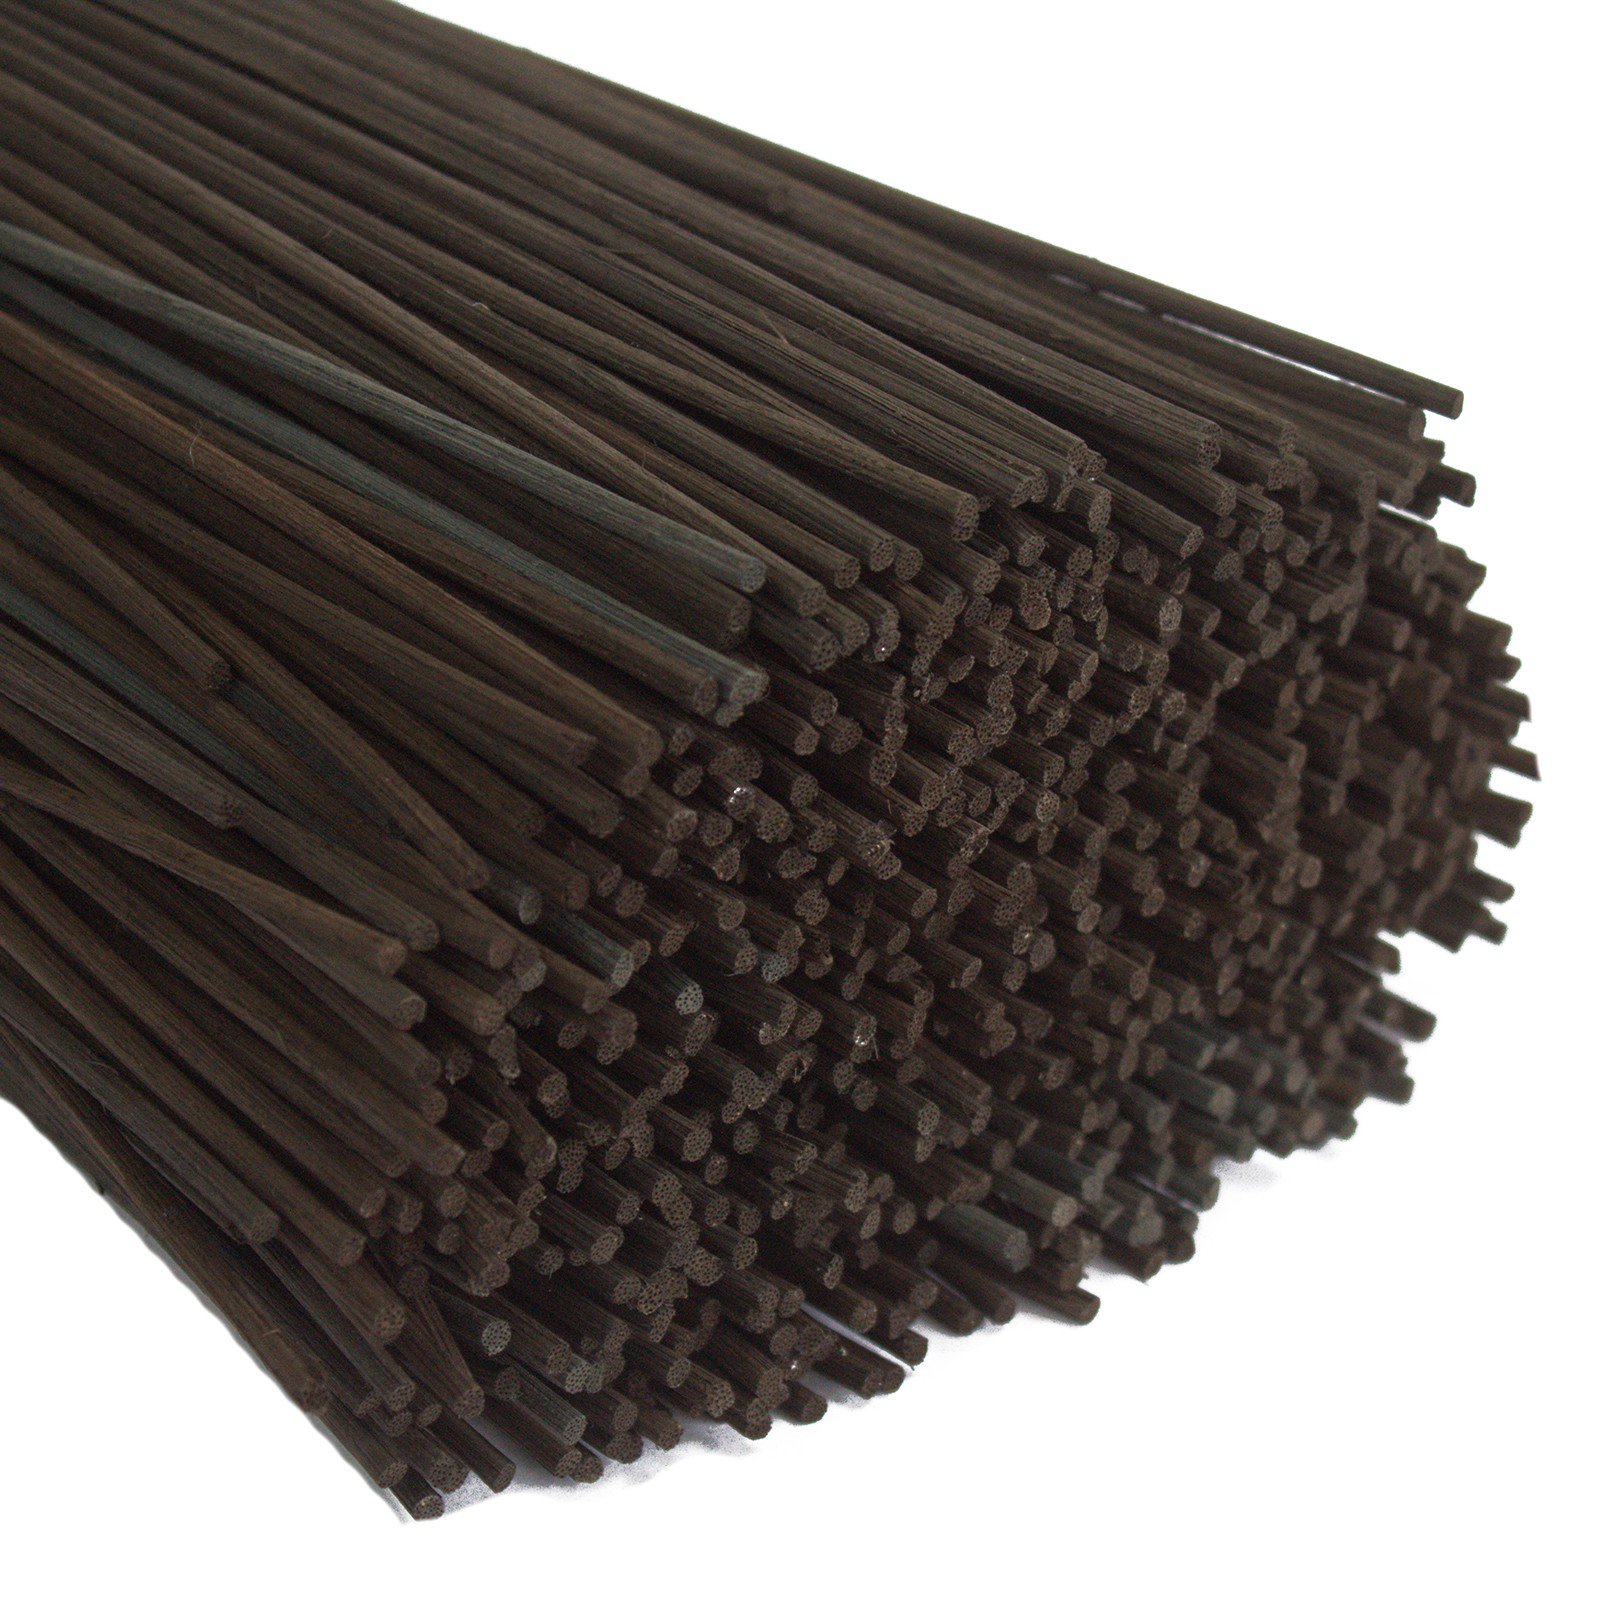 12 Pack of Black Reed Diffuser Sticks 3mm 